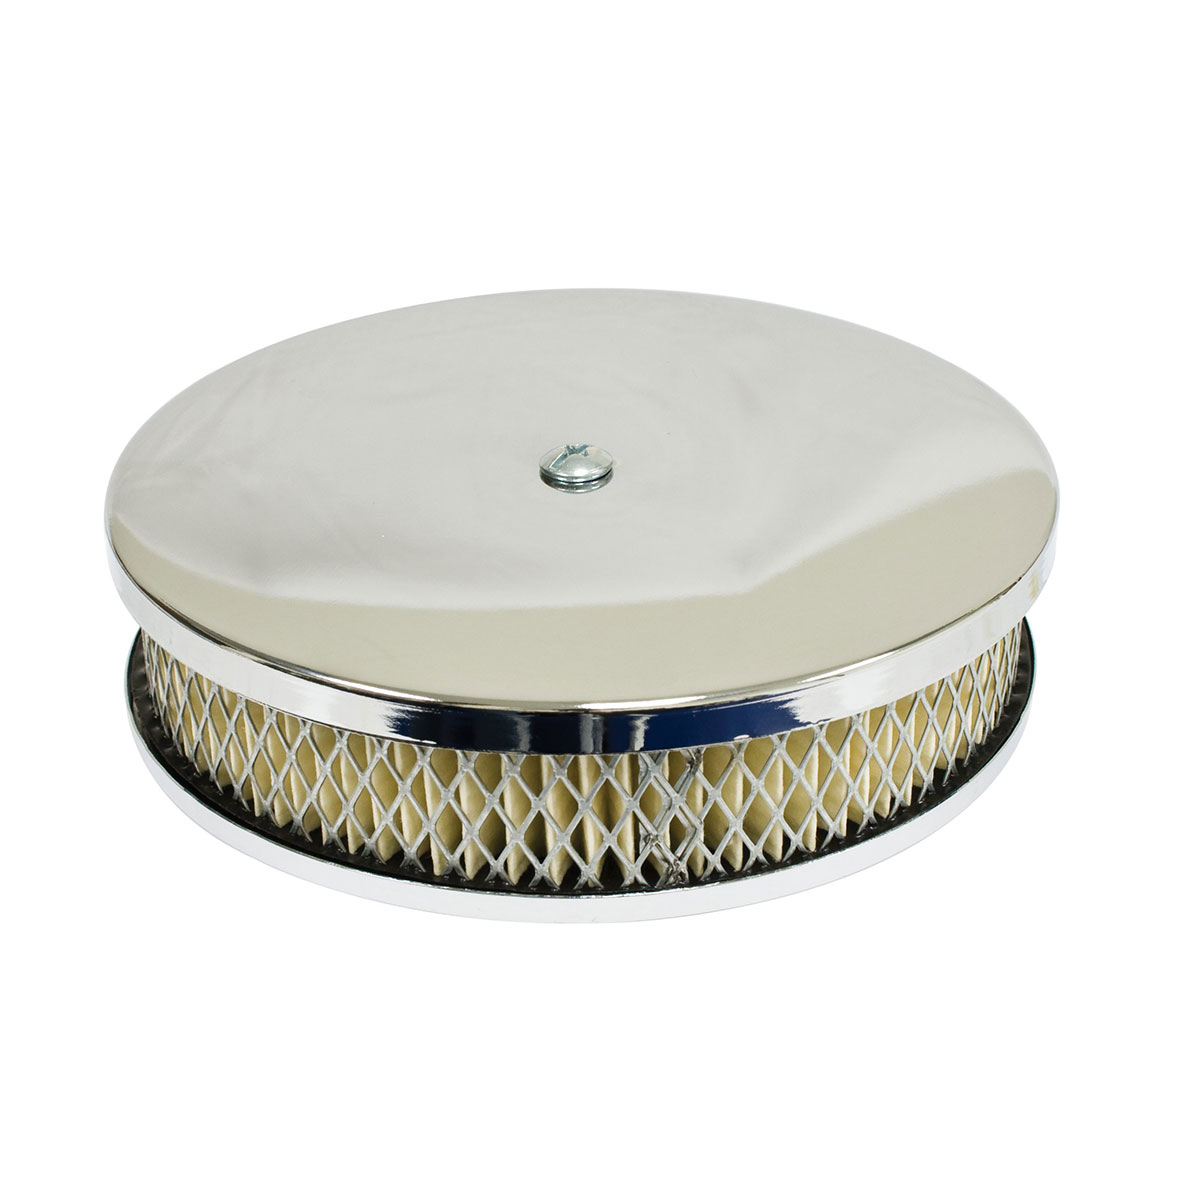 EMPI VW Air Cleaner - Stock - 6 3/8" x 2 3/8"